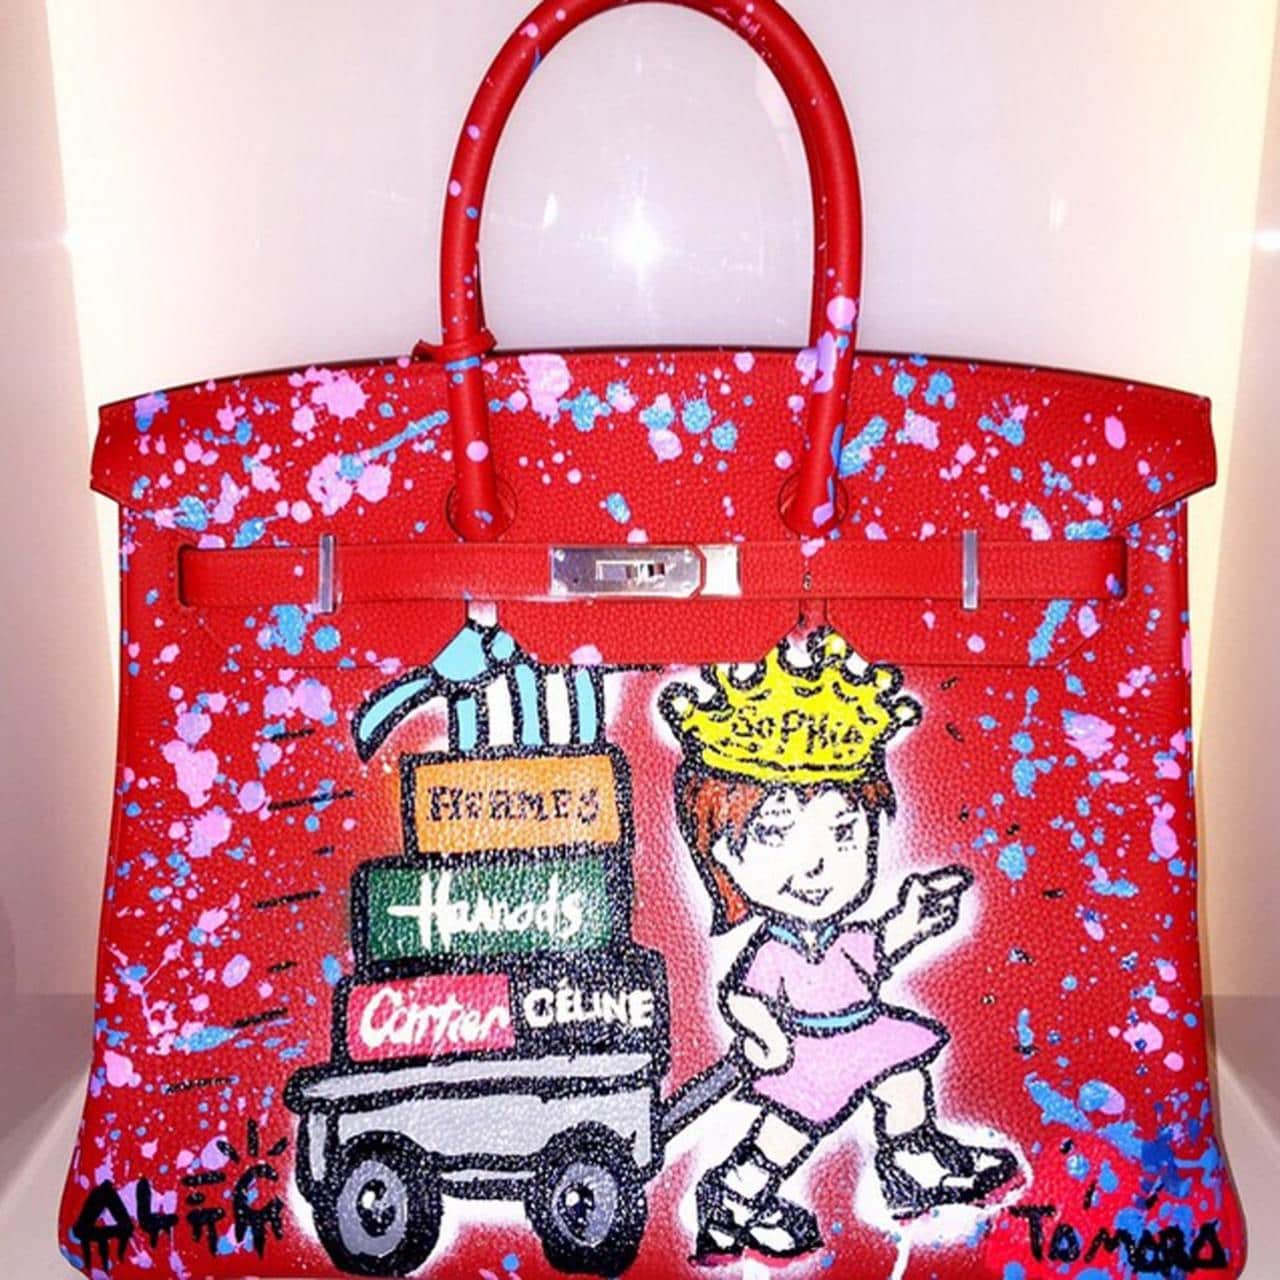 Alec Monopoly is also well known for painting the Birkin bags of many celeb...